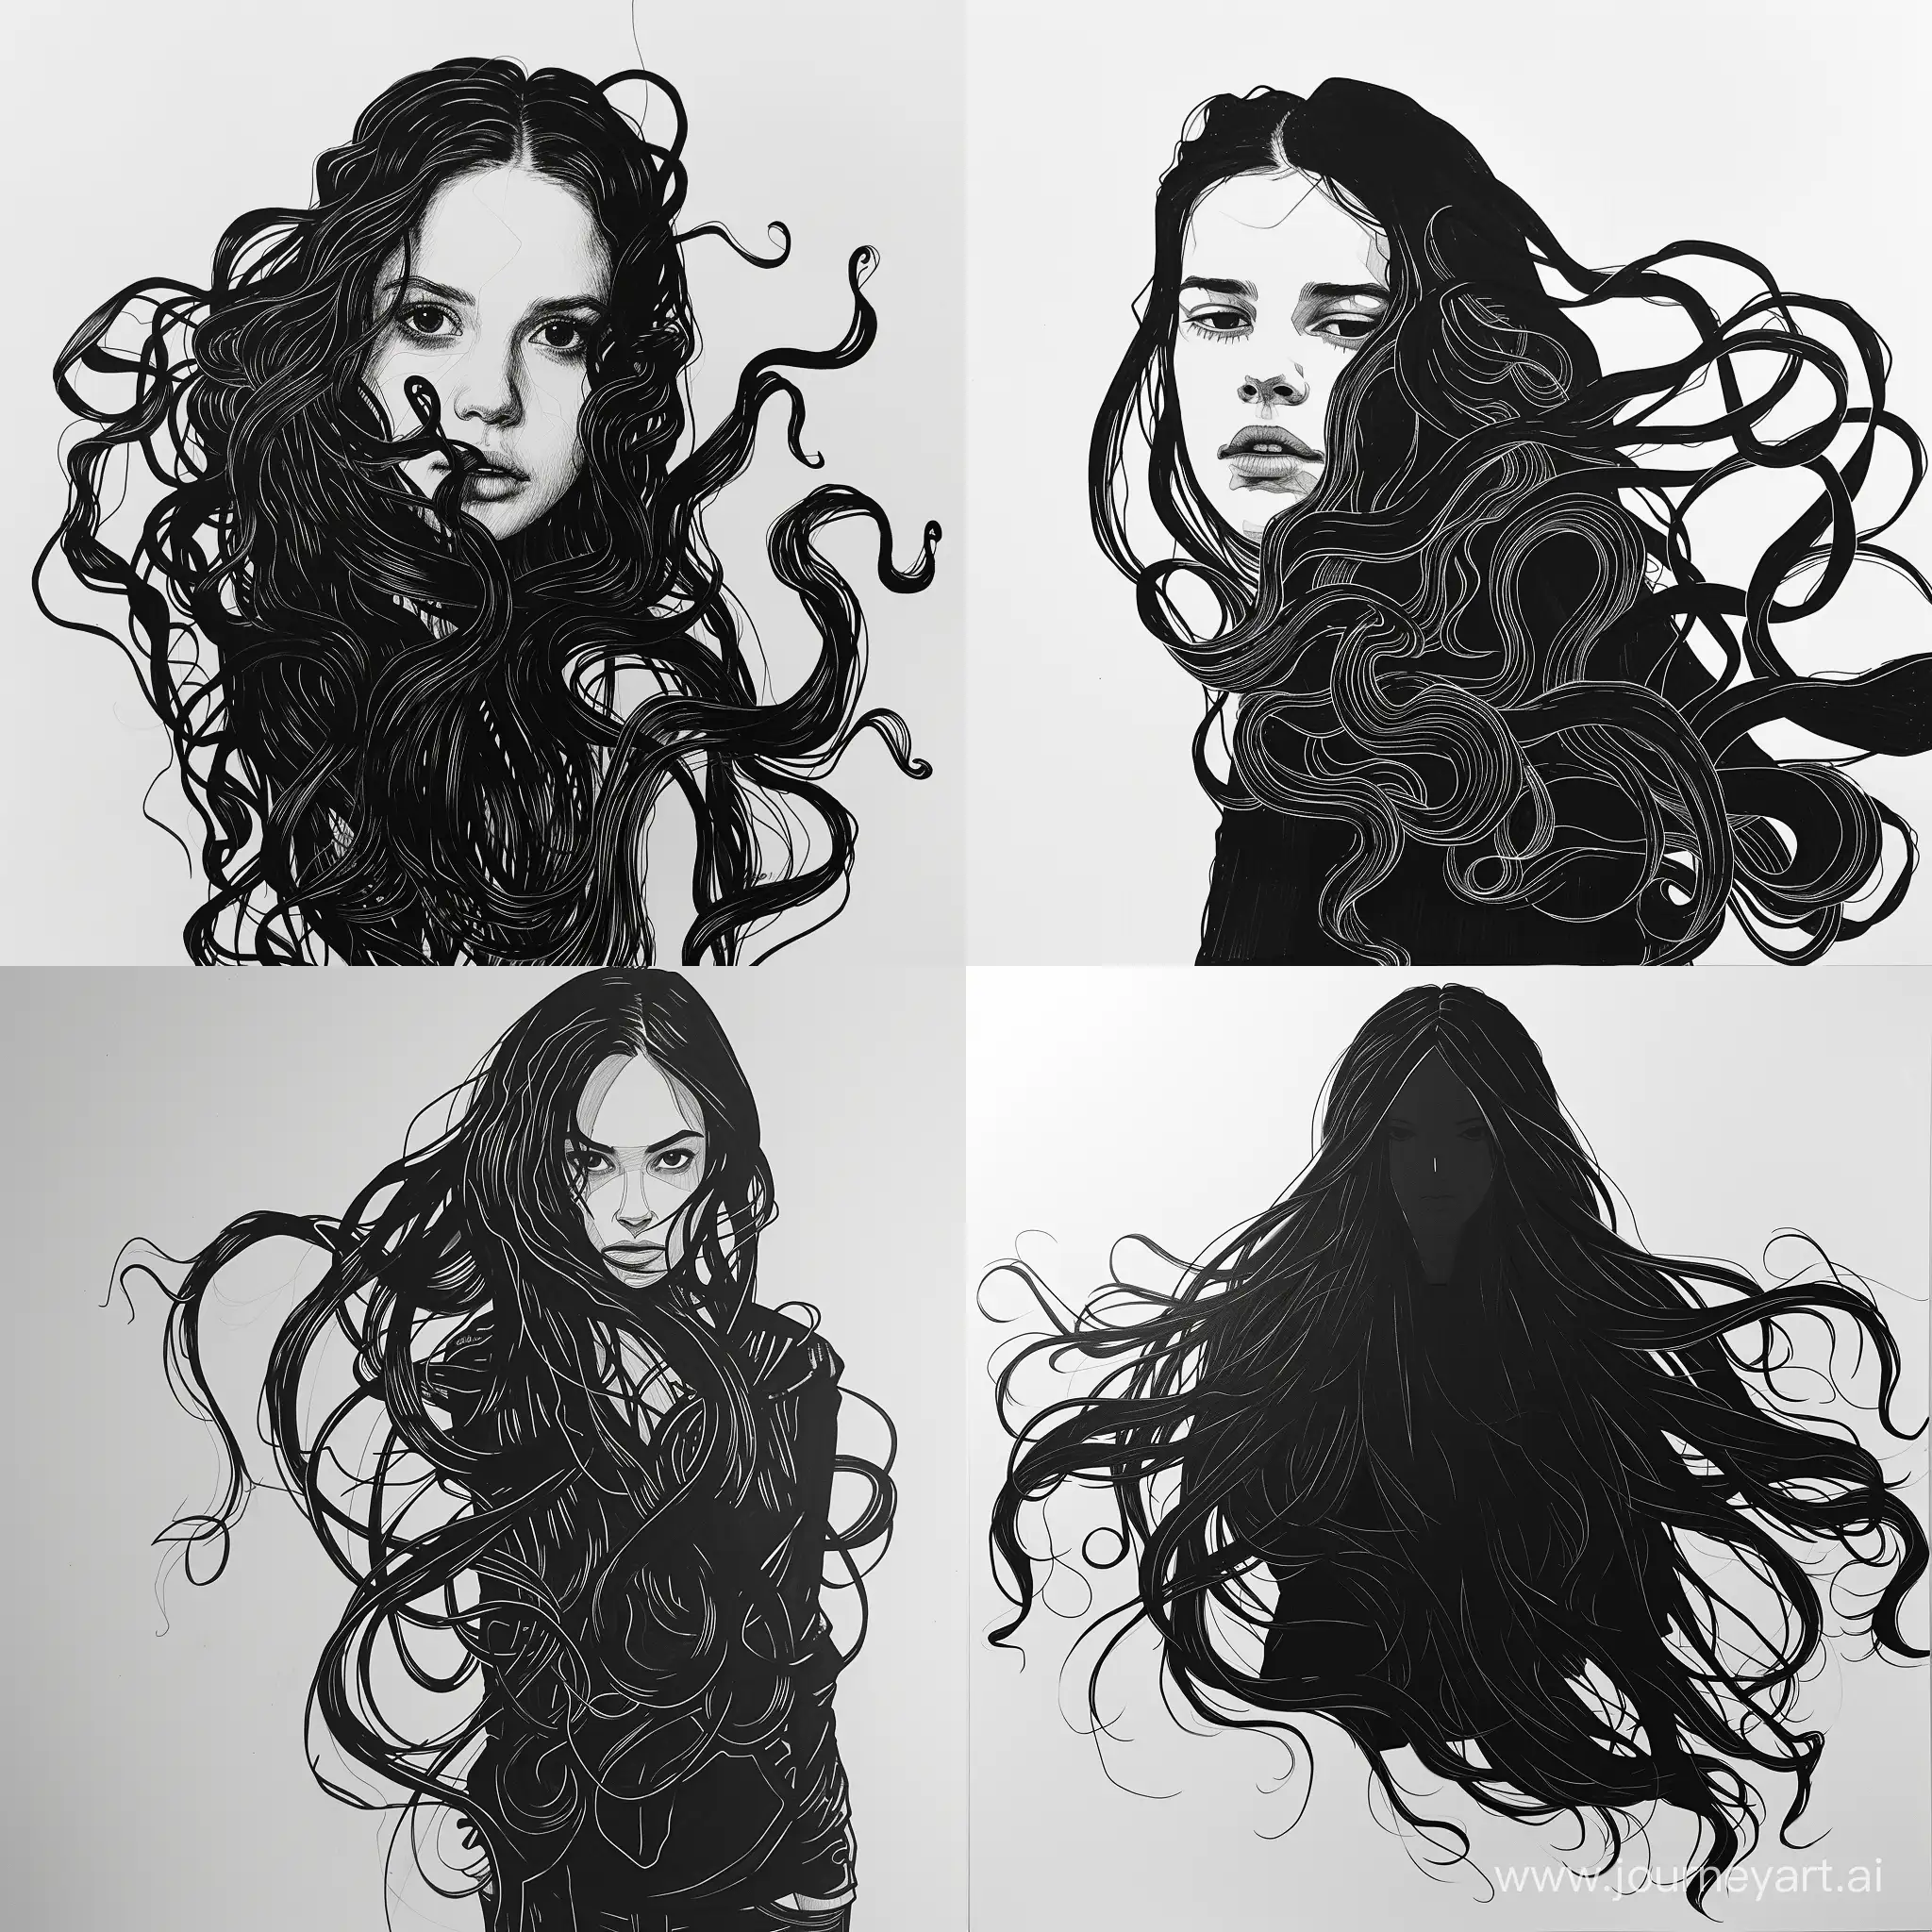 A realistic drawing of a woman with long flowing hair, in all black with an white background, drawn by using only one continue line with multiple curlrve